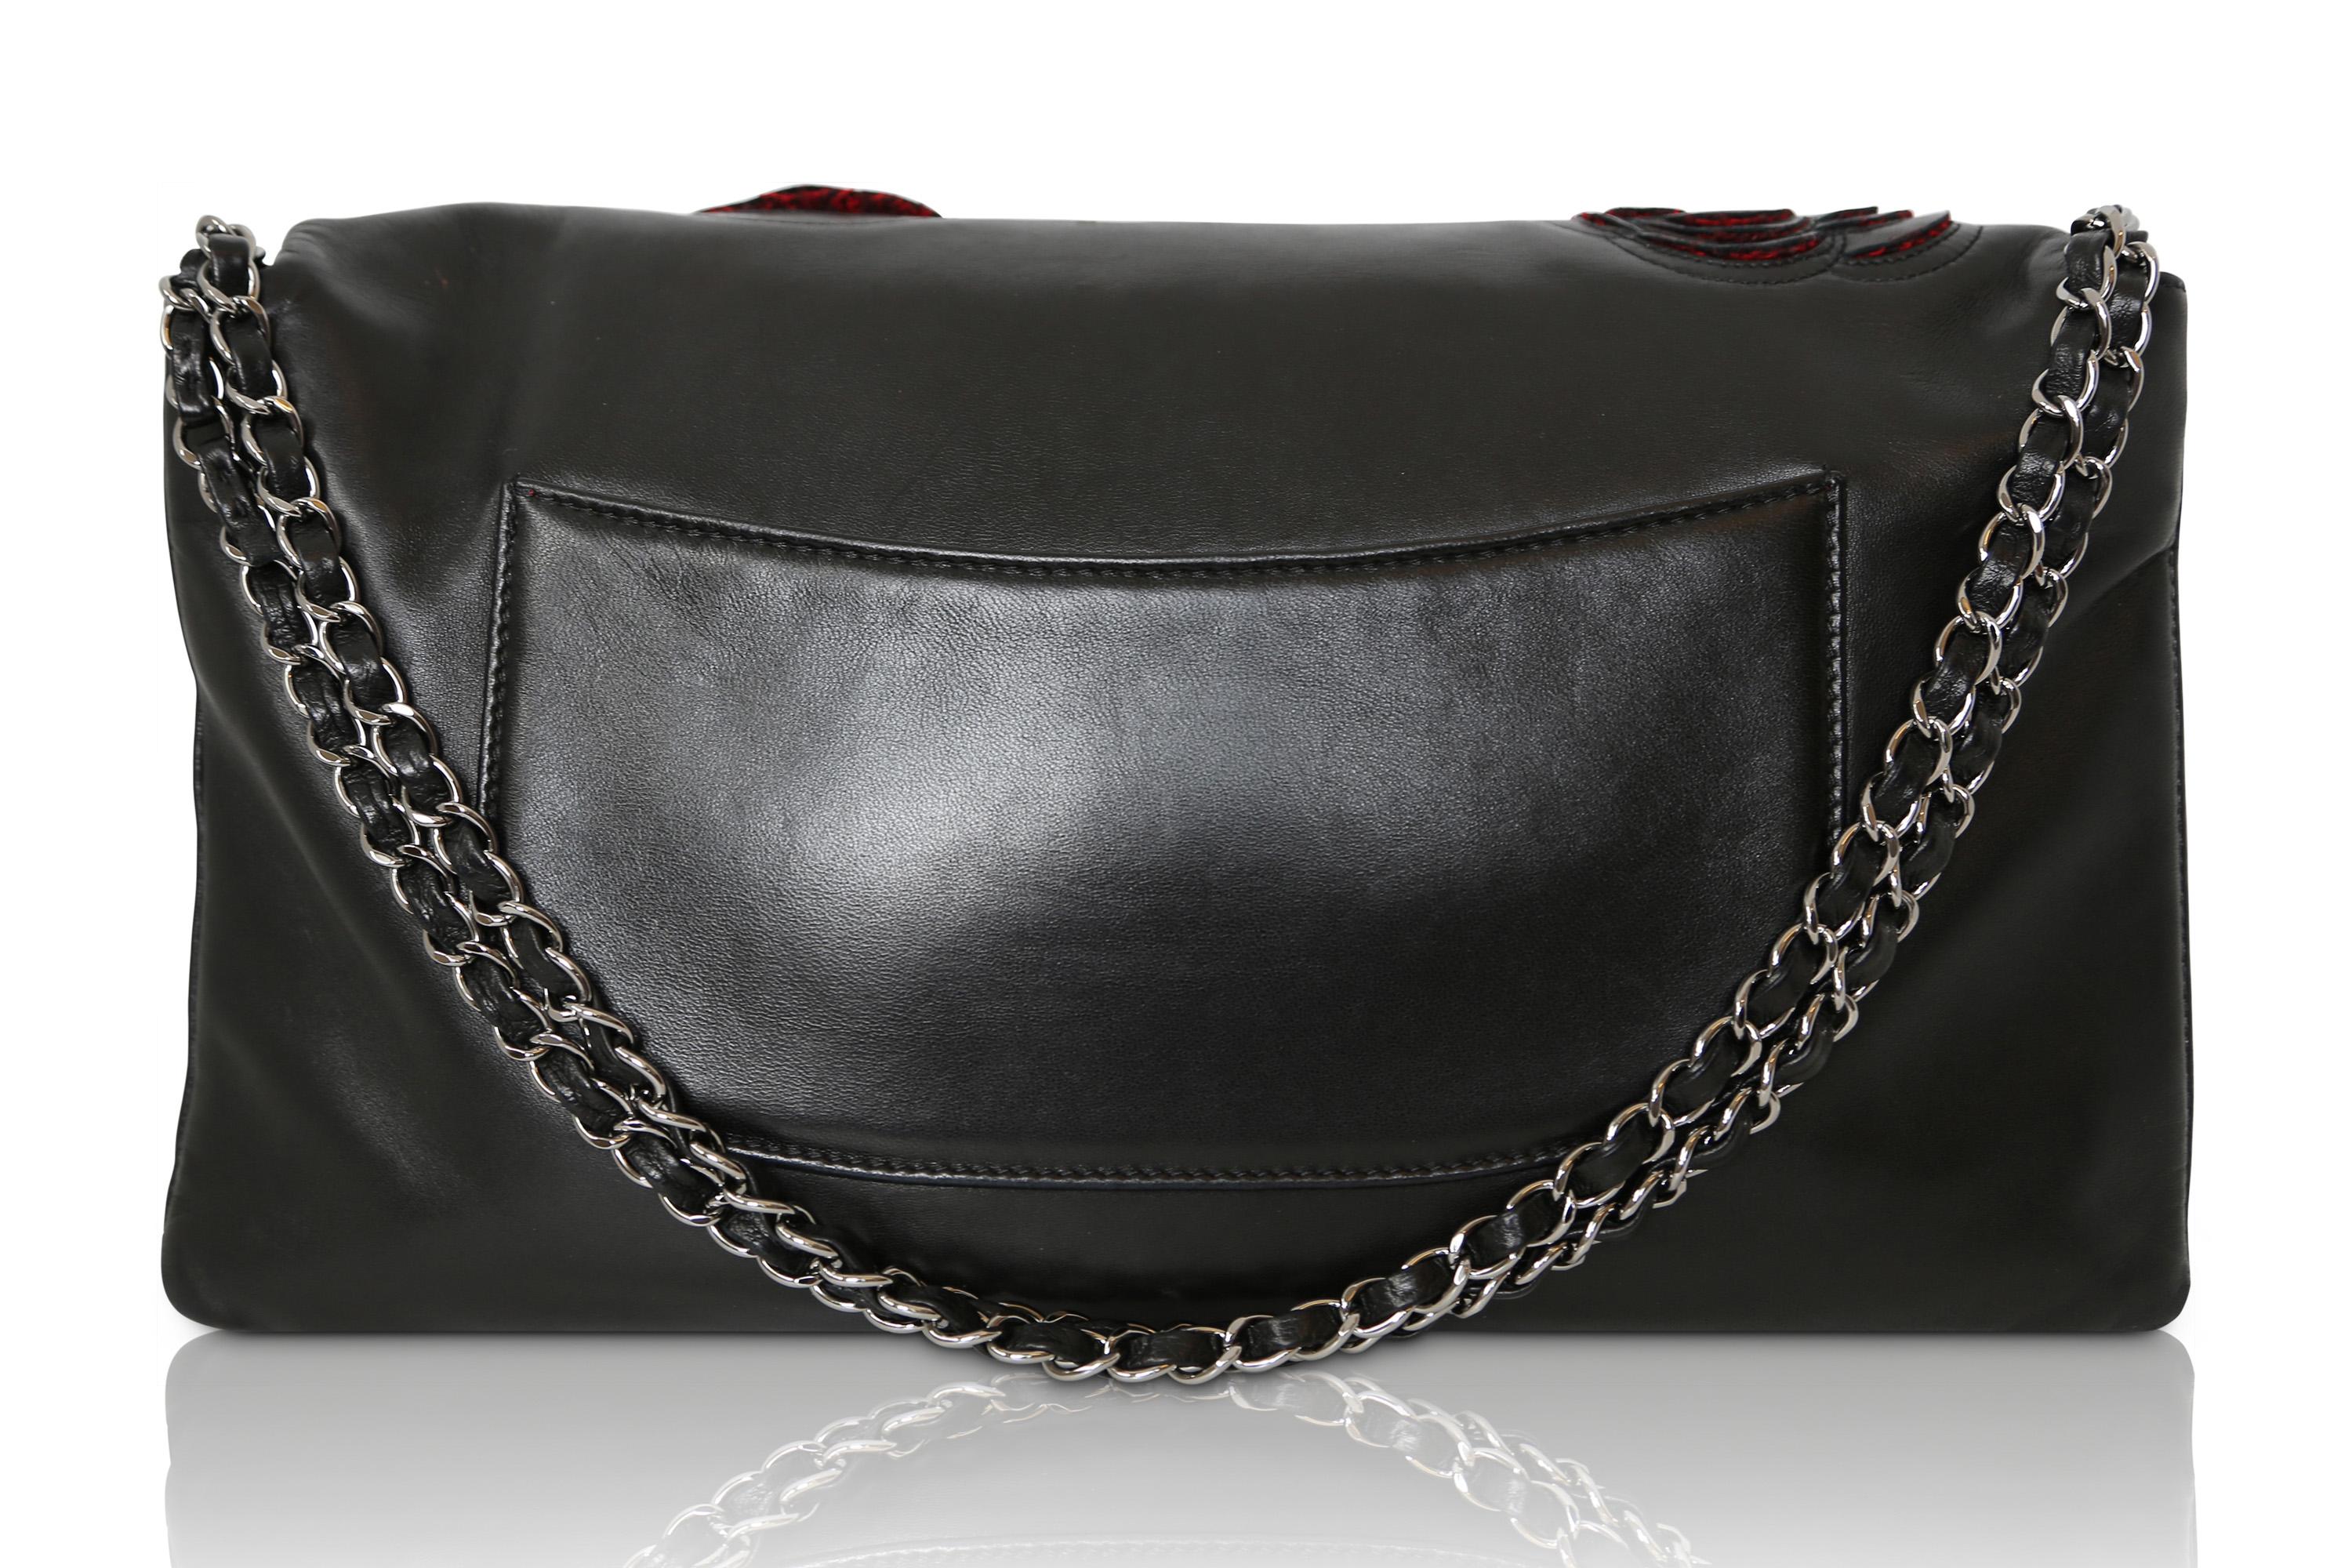 Chanel Black Lambskin Camellia Runway Flap Bag In Good Condition For Sale In London, GB